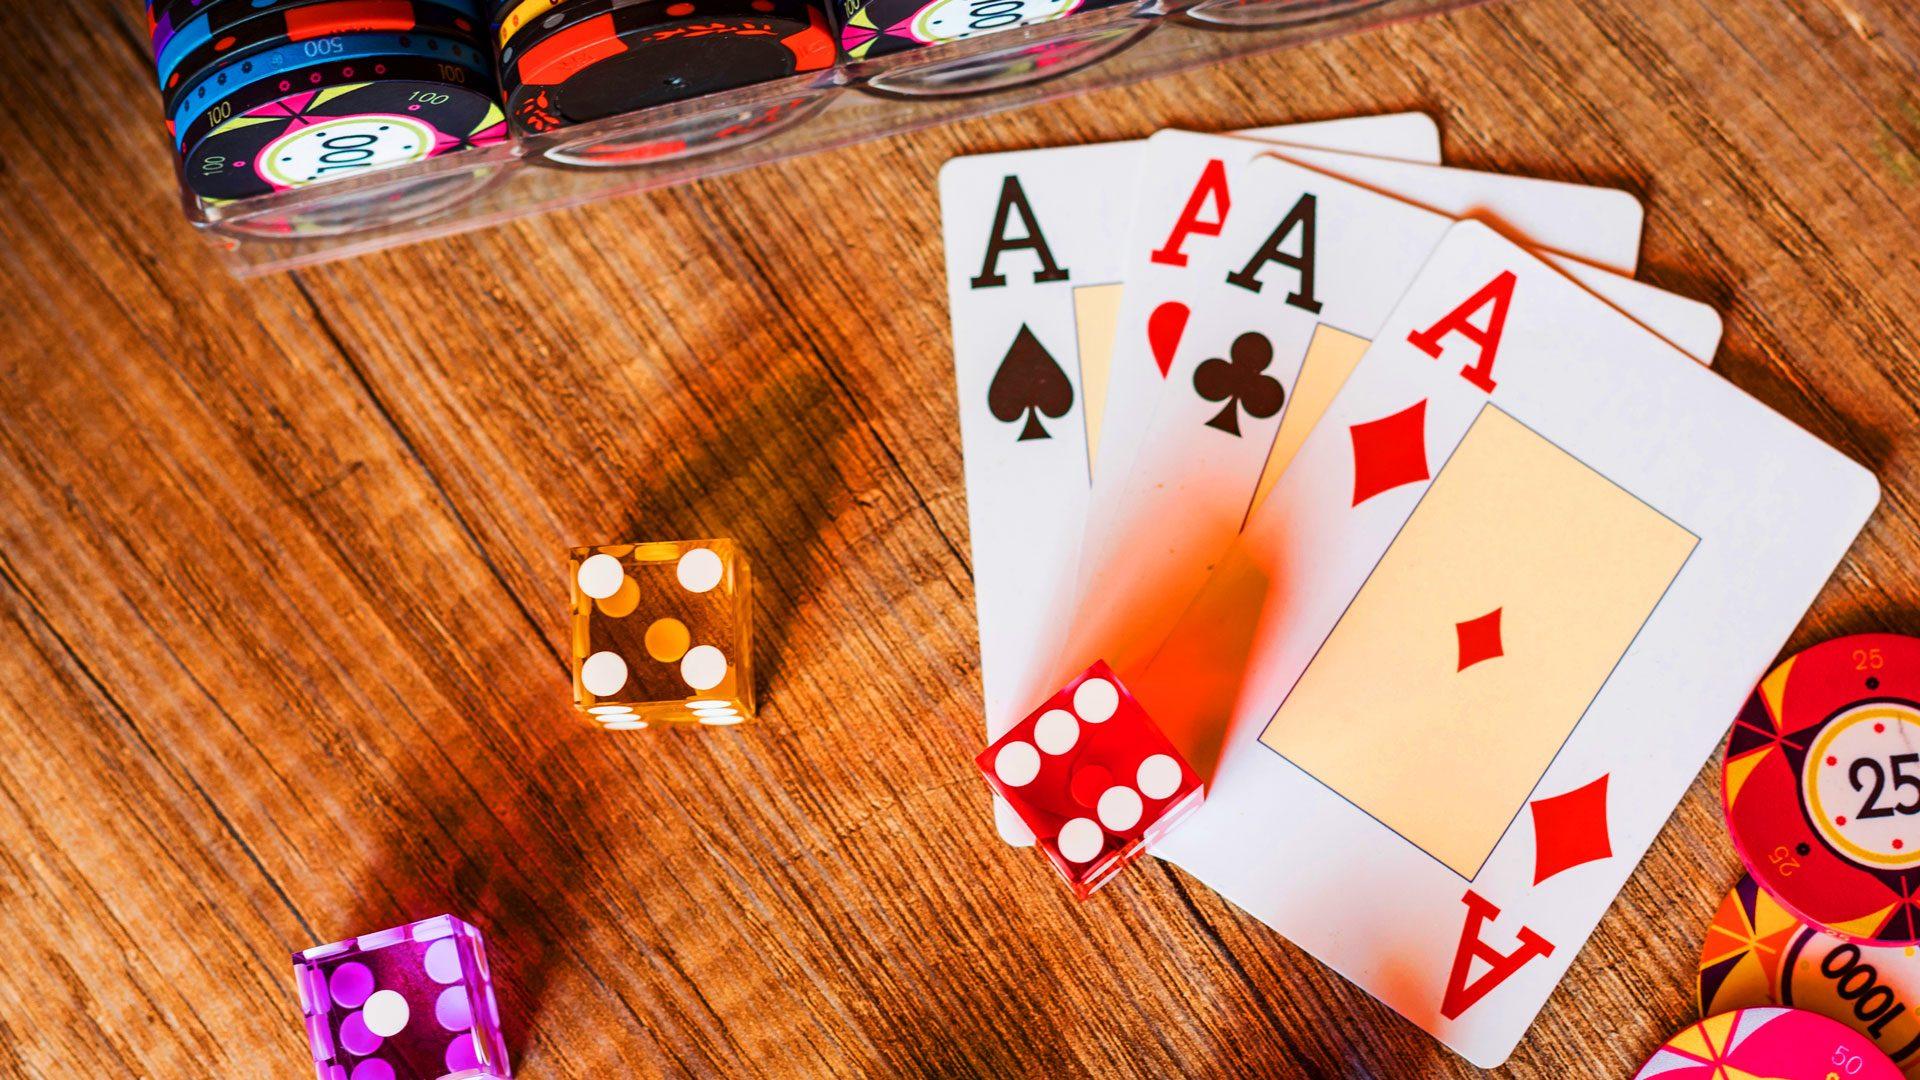 What Are The Convergence Between Gambling And Gaming?